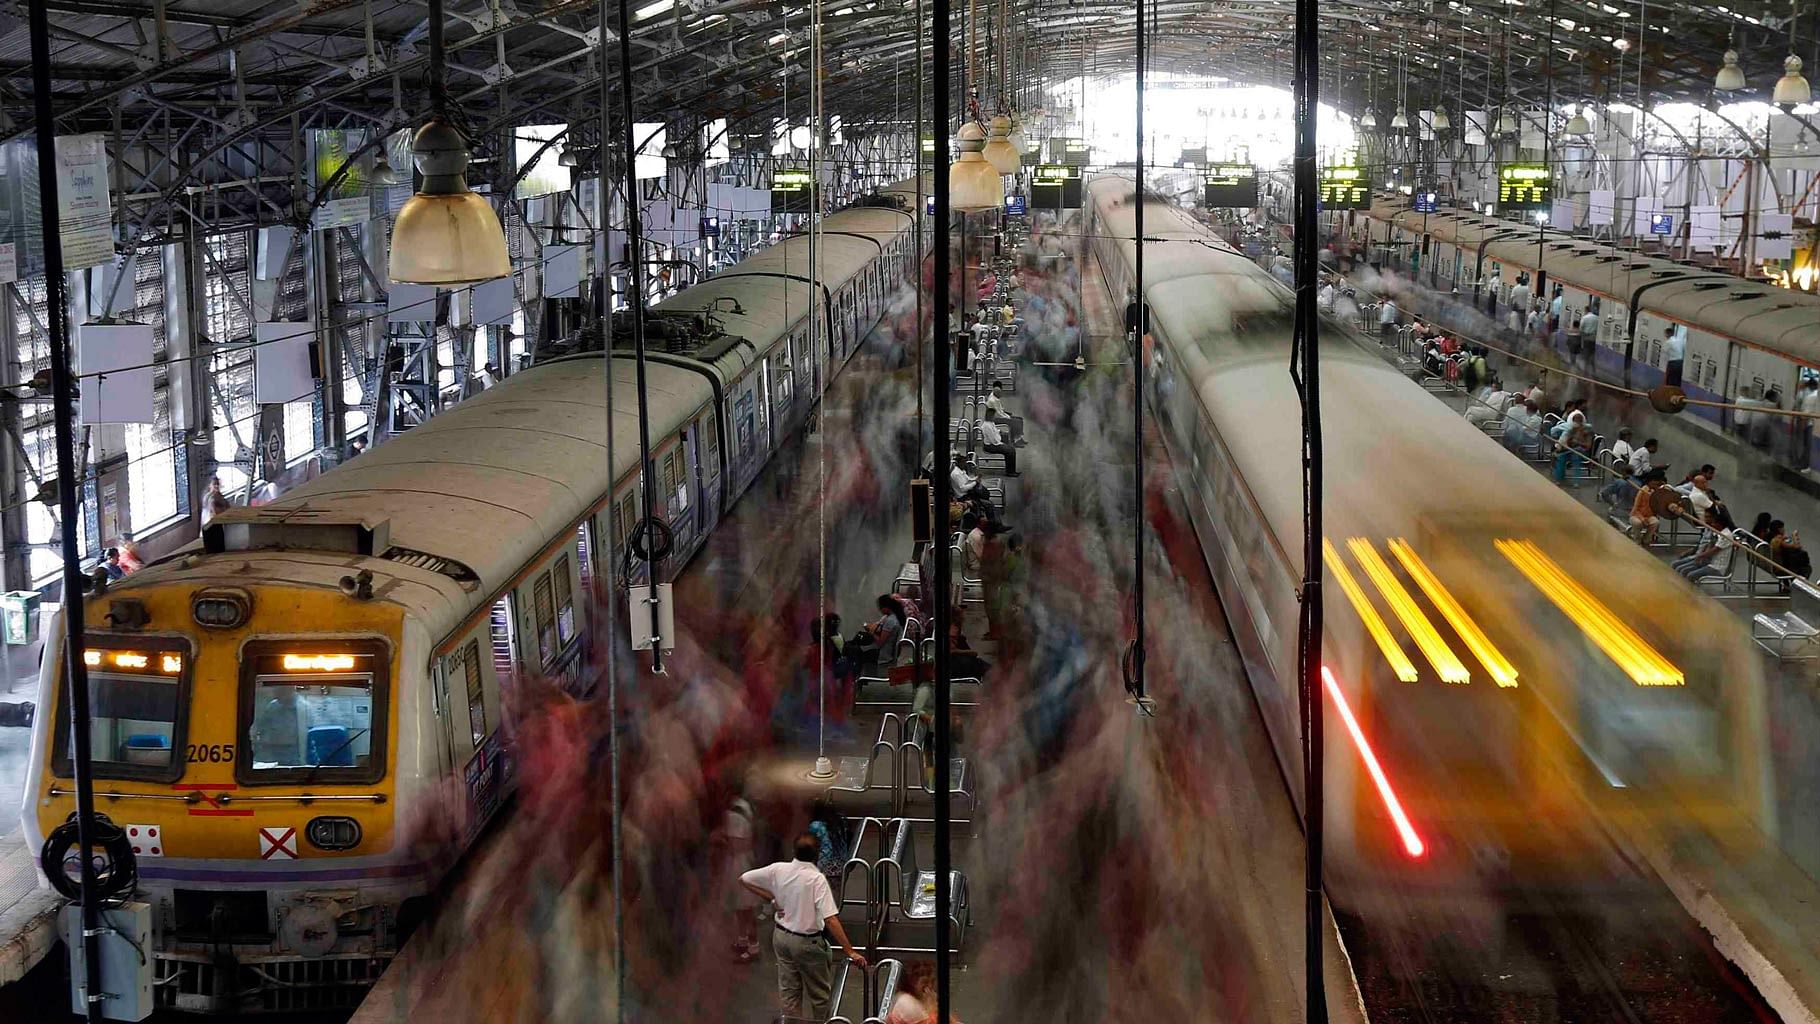 According to WR, on Tuesday 32.60 lakh passengers travelled on their suburban trains as against 40.75 lakh on Monday.